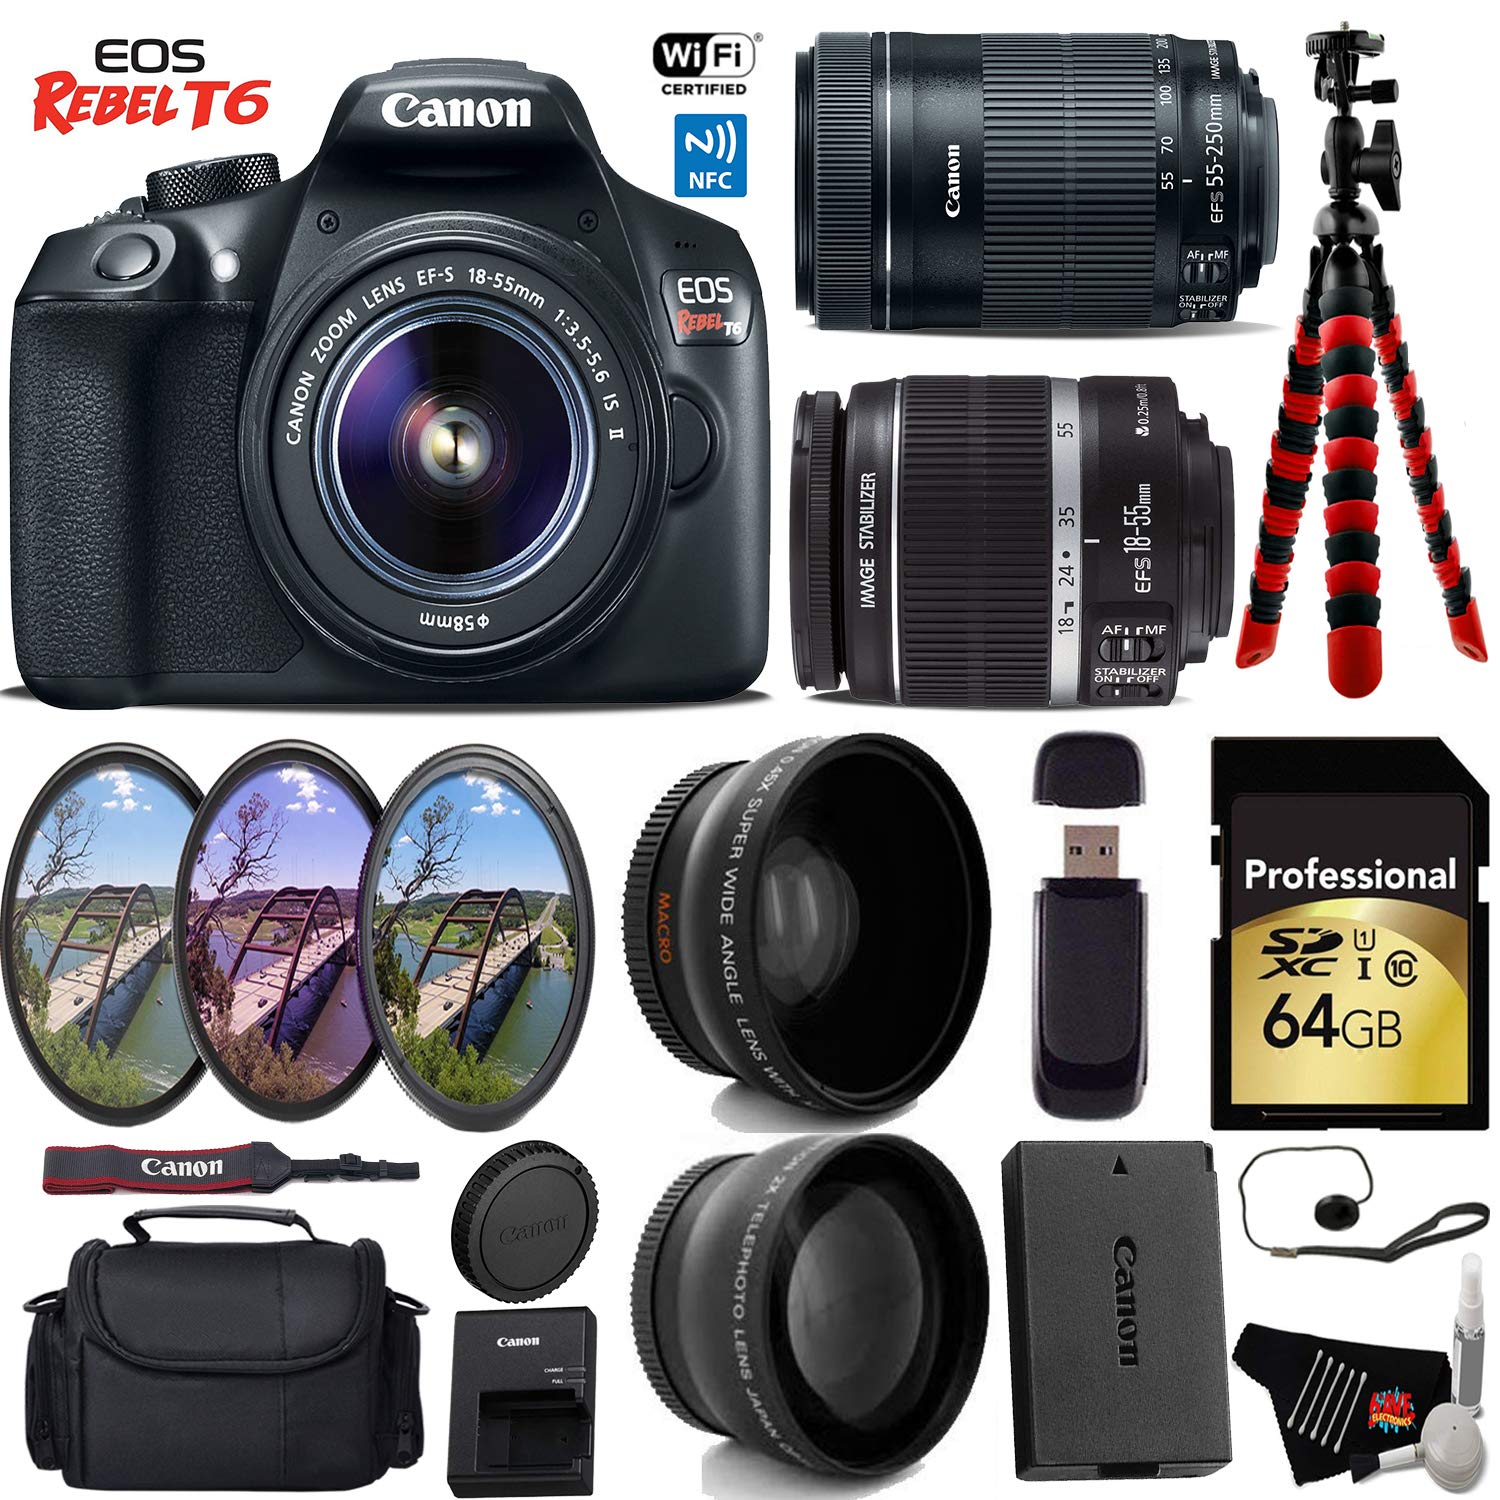 Canon EOS Rebel T6 DSLR Camera 18-55mm is Lens & 55-250mm is STM Lens + UV FLD CPL Filter Kit + Wide Angle & Telephoto L